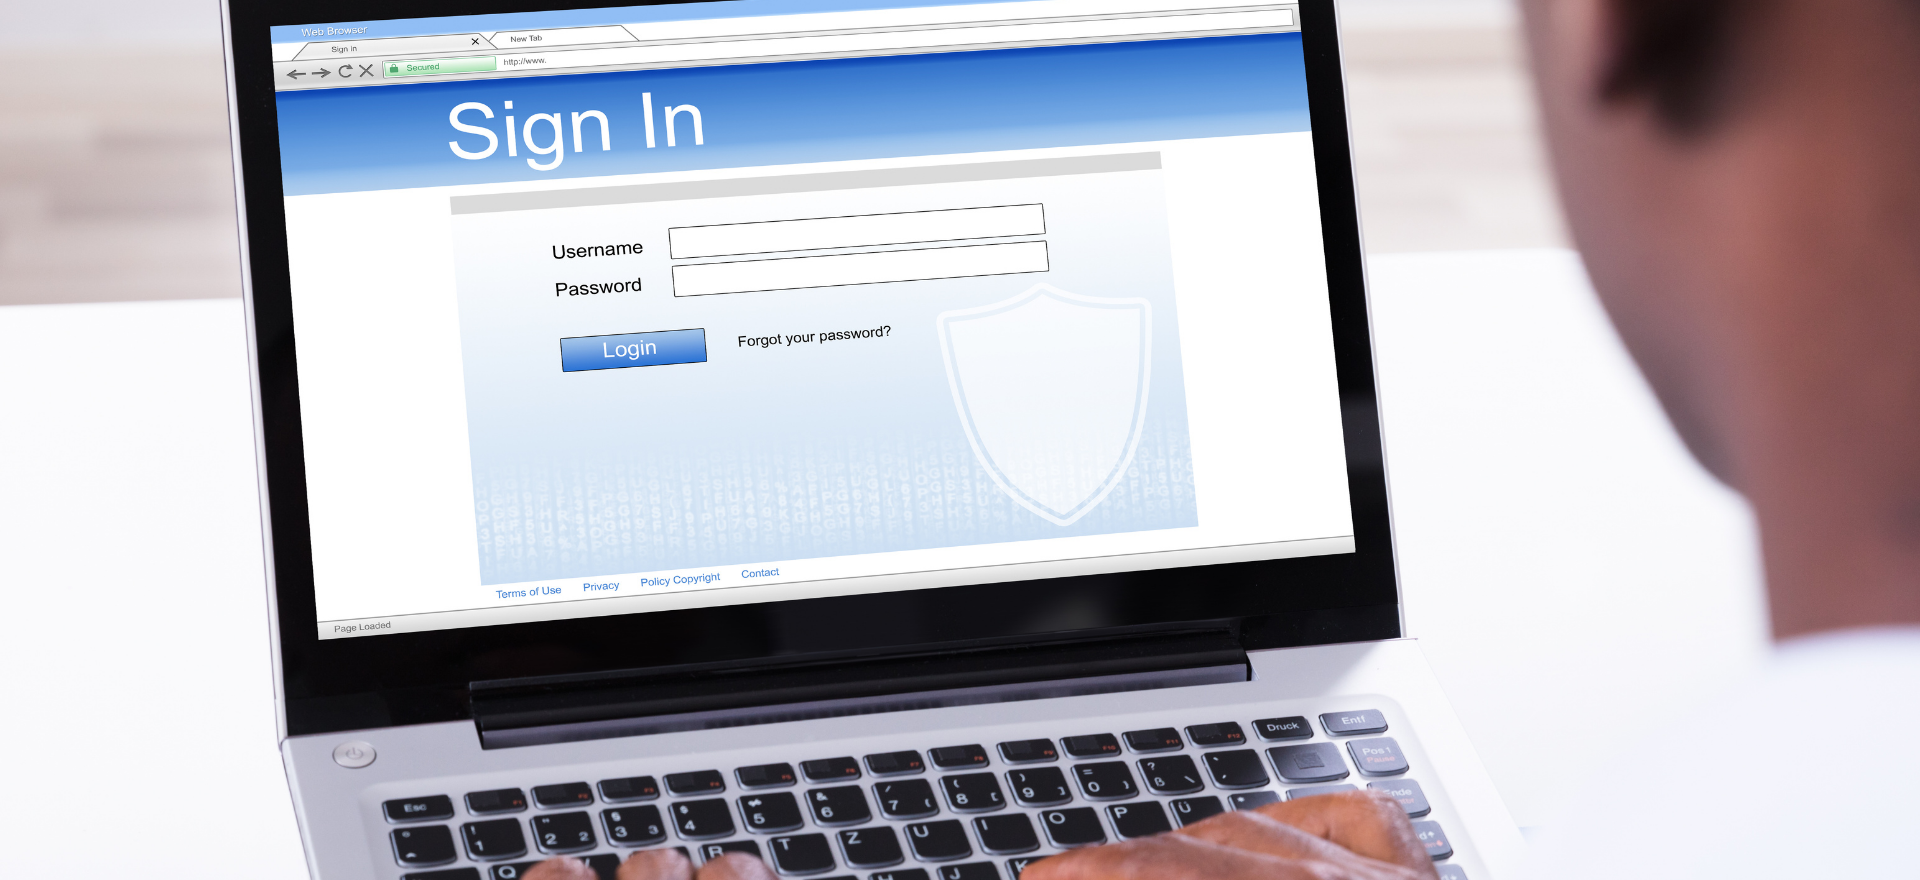 Man signing into a website with a laptop requesting username and password